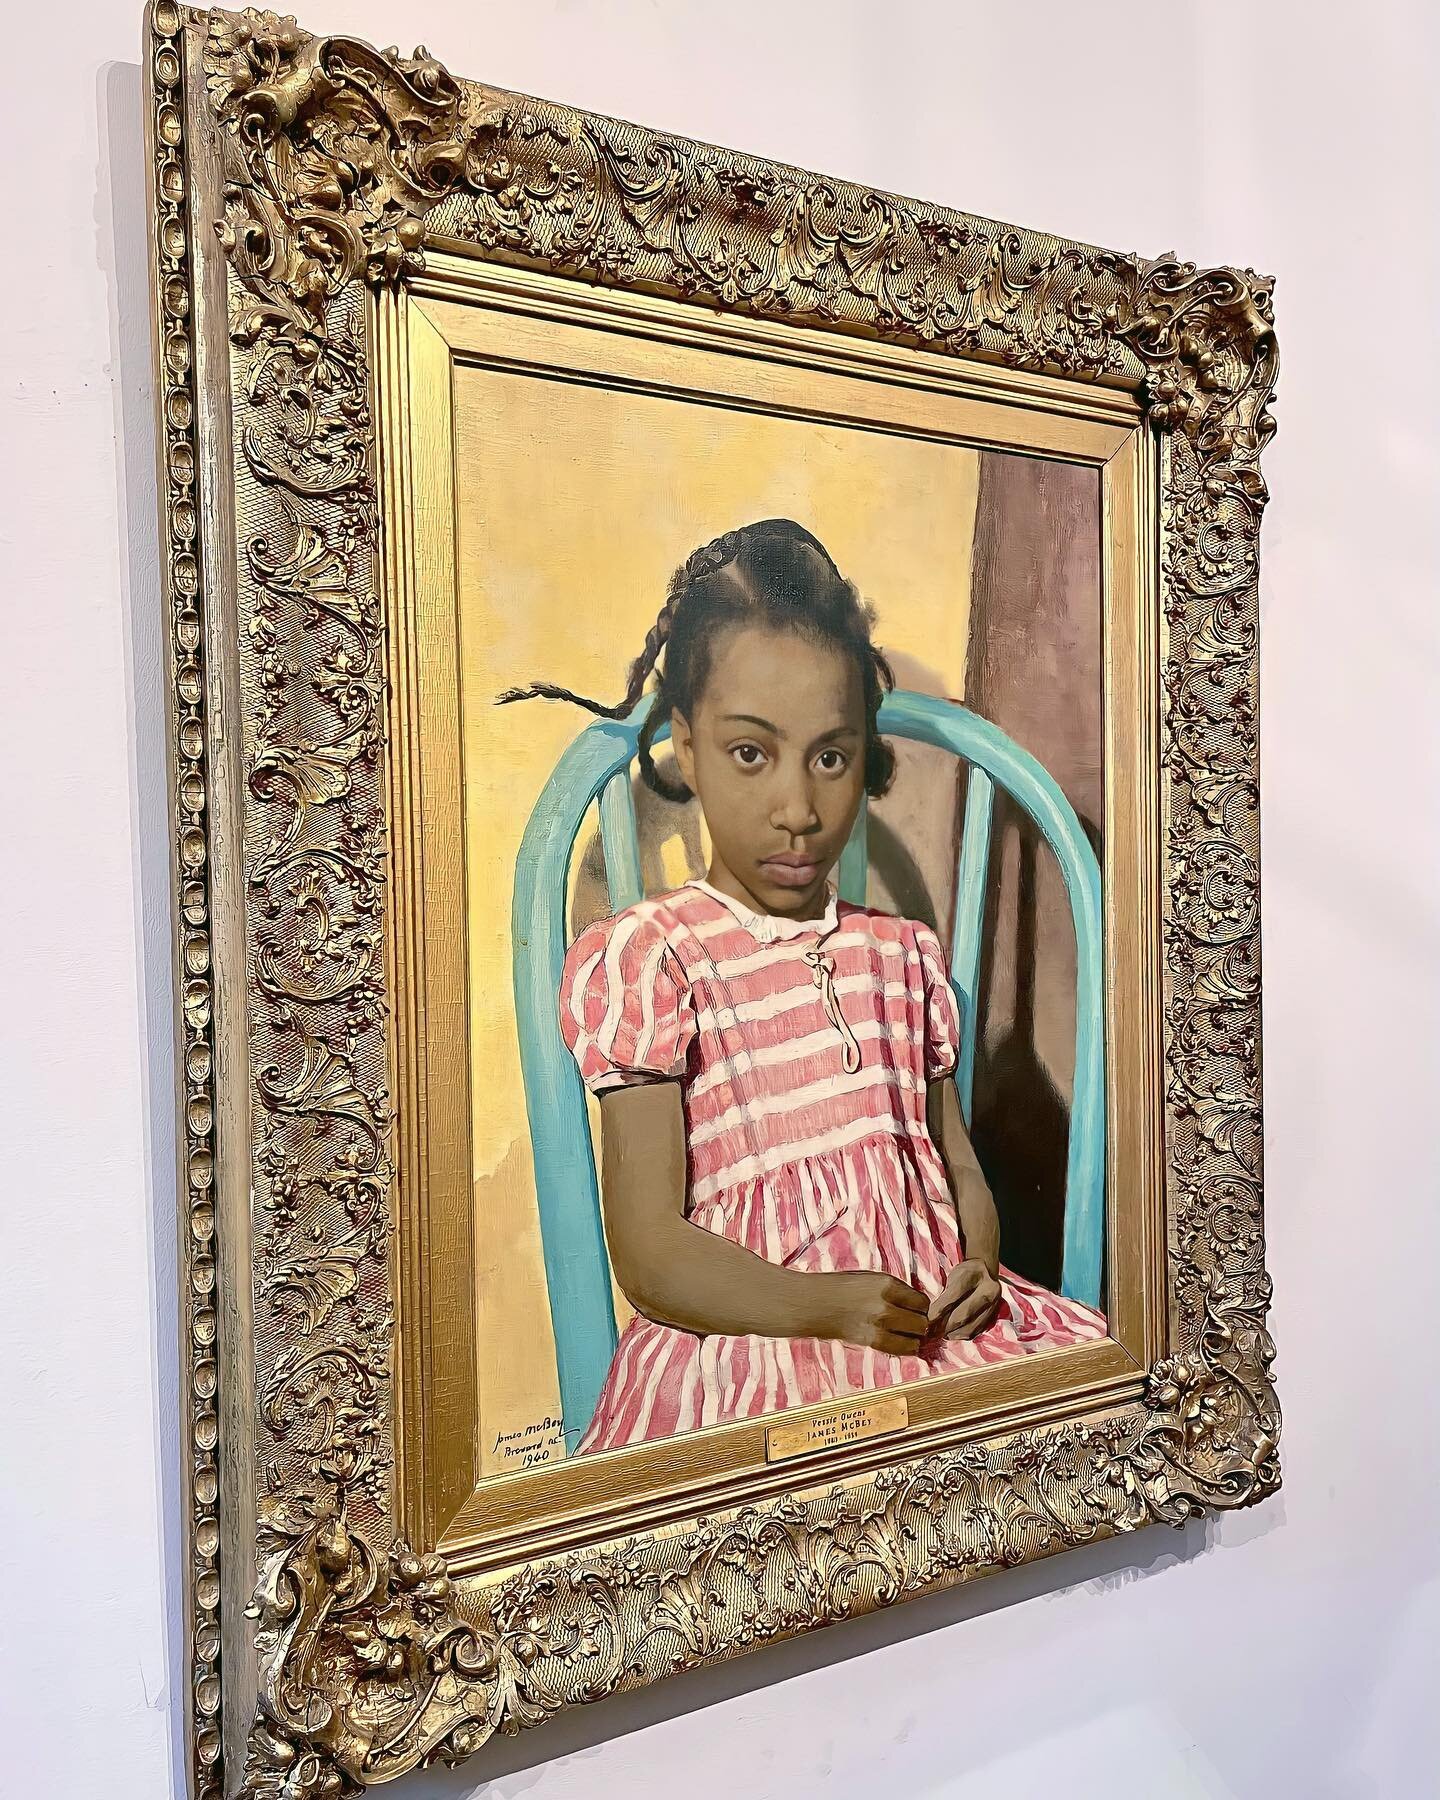 The Beautiful &lsquo;Little Vessie Owens&rsquo; featuring in our &lsquo;Wonderful World of James McBey&rsquo; exhibition in association with @thefineartsoc, showing later this year. For more information on this sought-after artist and unique piece, p